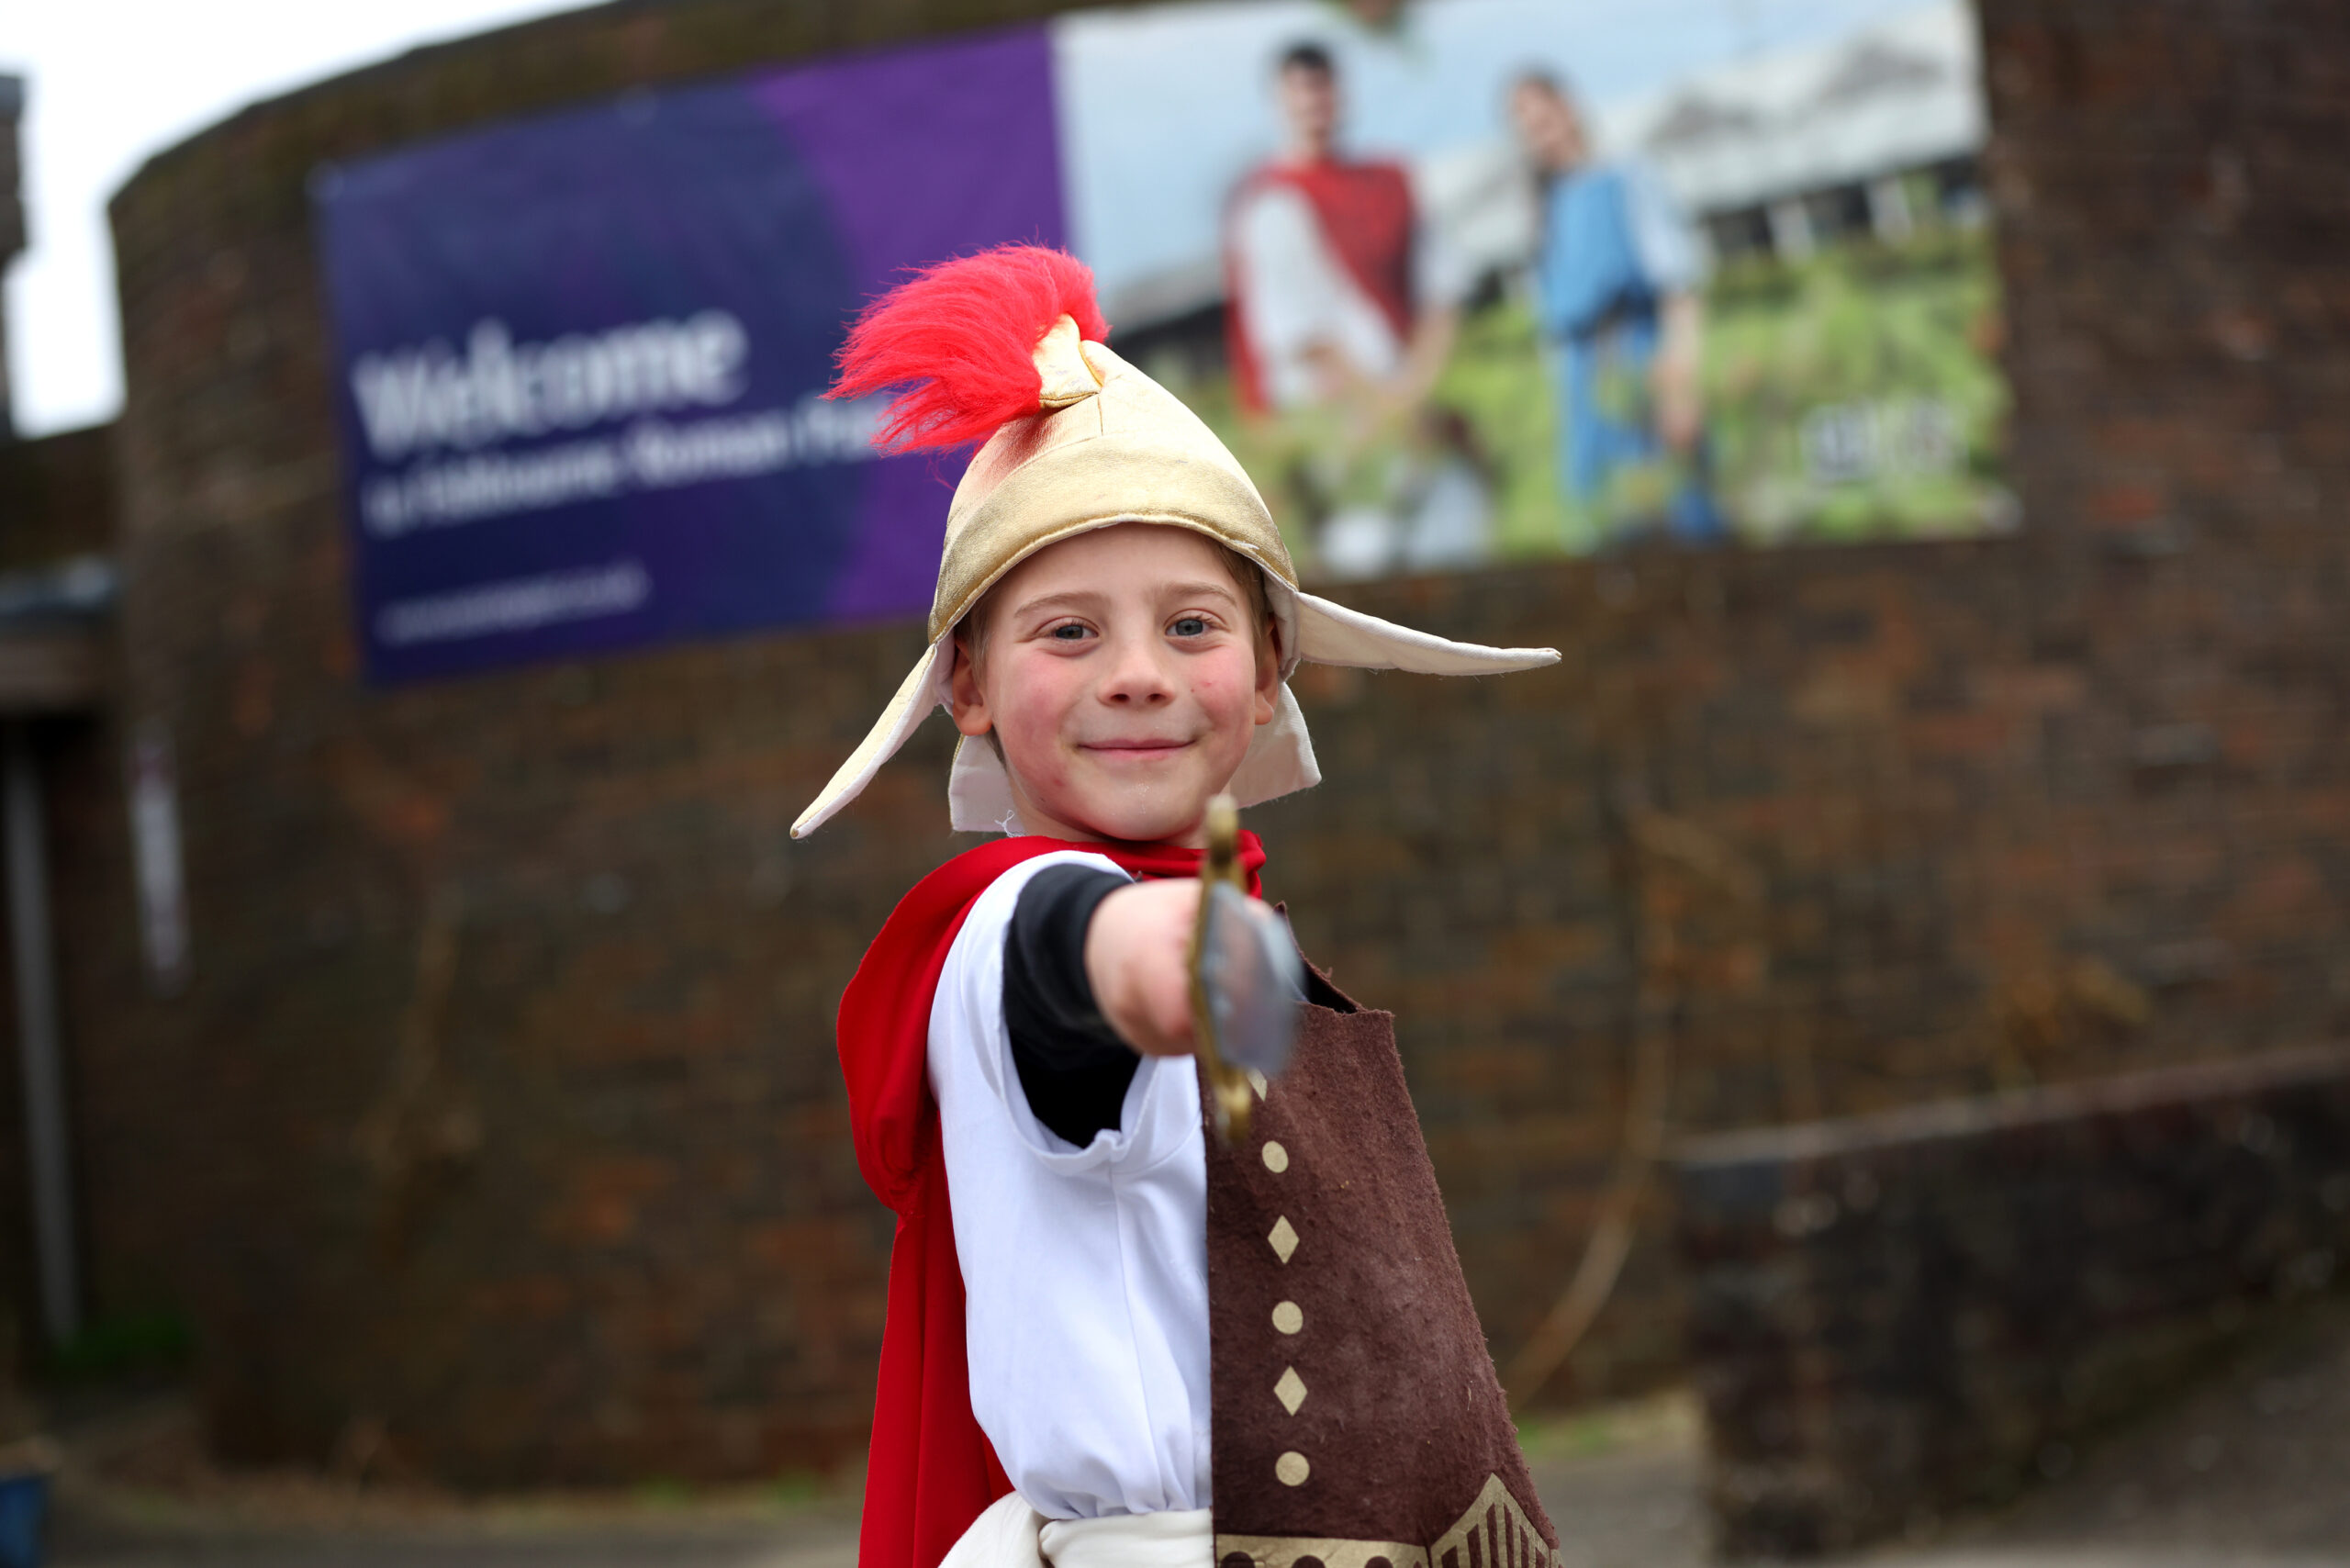 Easter days out in Sussex include activities at Fishbourne Roman Palace